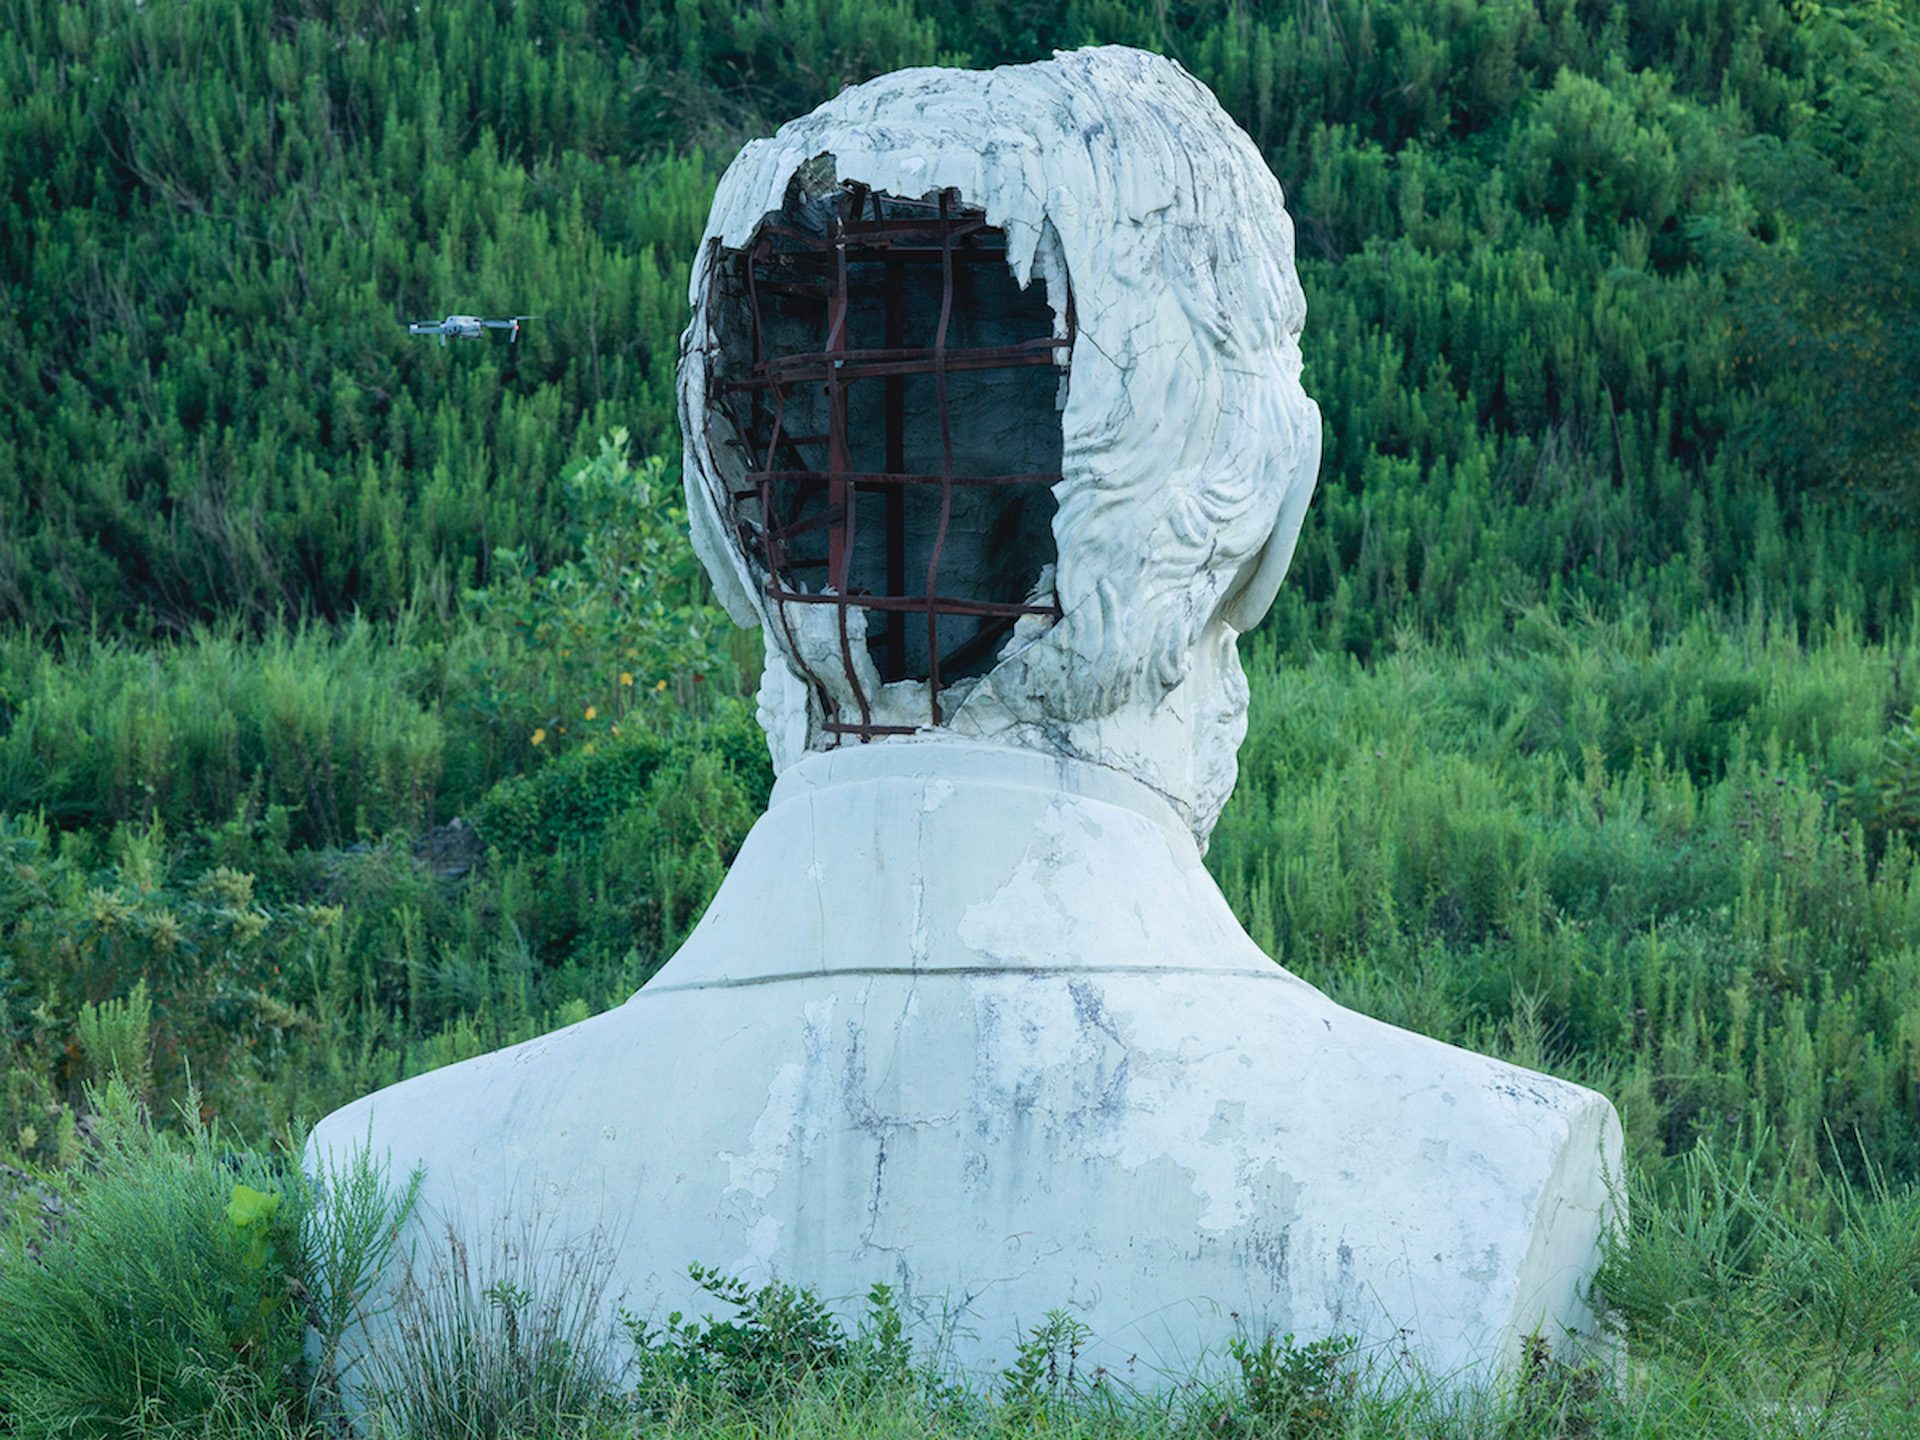 Image from American Glitch by Andrea Orejarena and Caleb Stein showing the back of a large statue's head crumbling away surrounded by trees